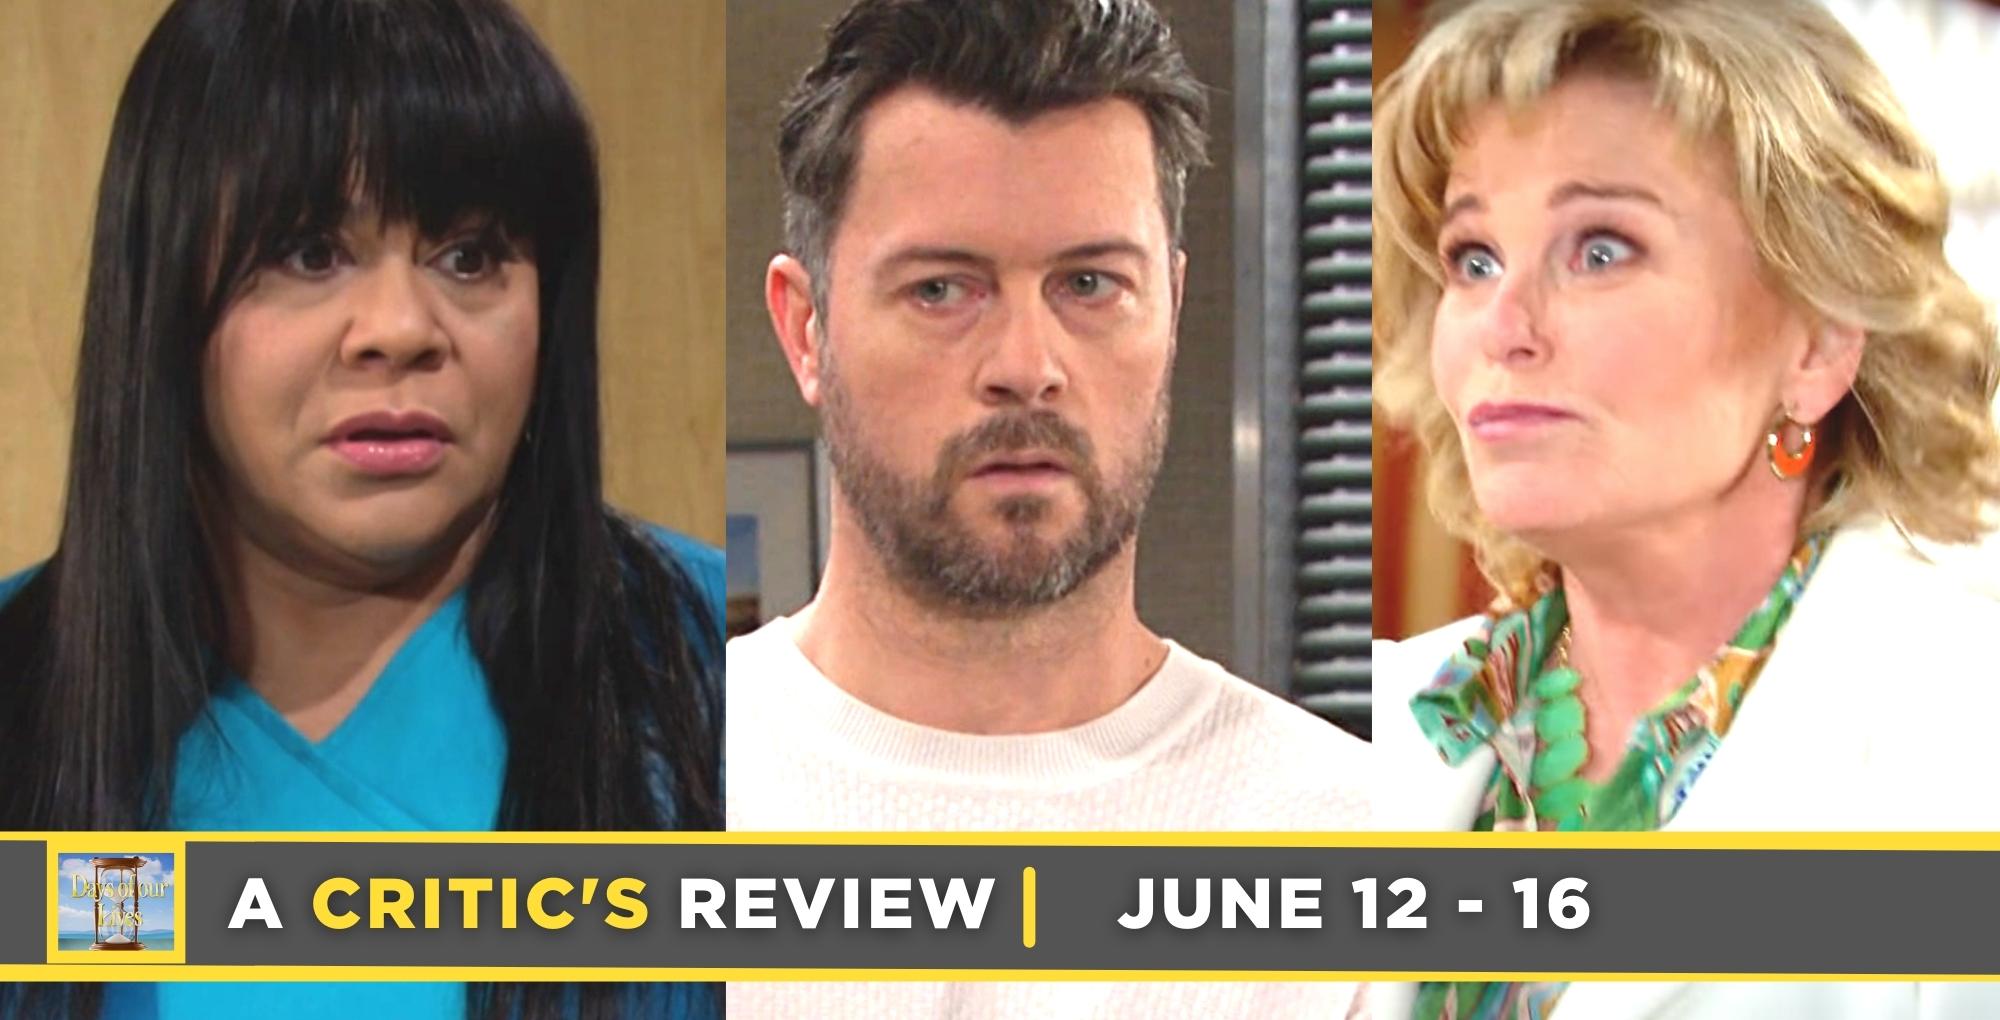 days of our lives critic's review for june 12 – june 16, 2023, three images whitley, ej, and bonnie.